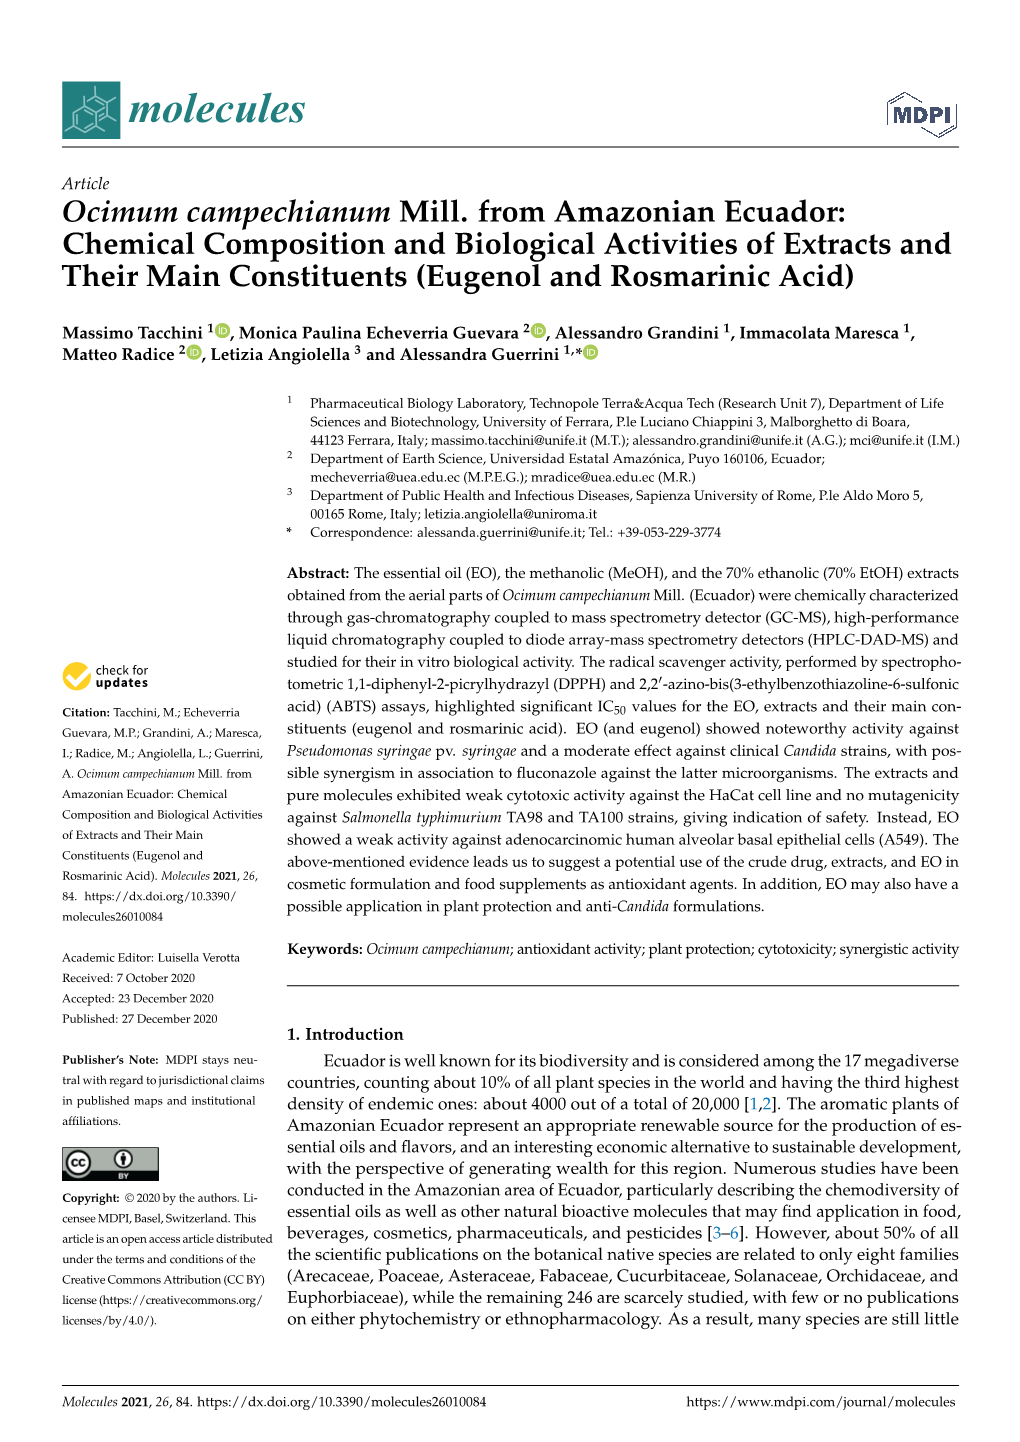 Ocimum Campechianum Mill. from Amazonian Ecuador: Chemical Composition and Biological Activities of Extracts and Their Main Constituents (Eugenol and Rosmarinic Acid)